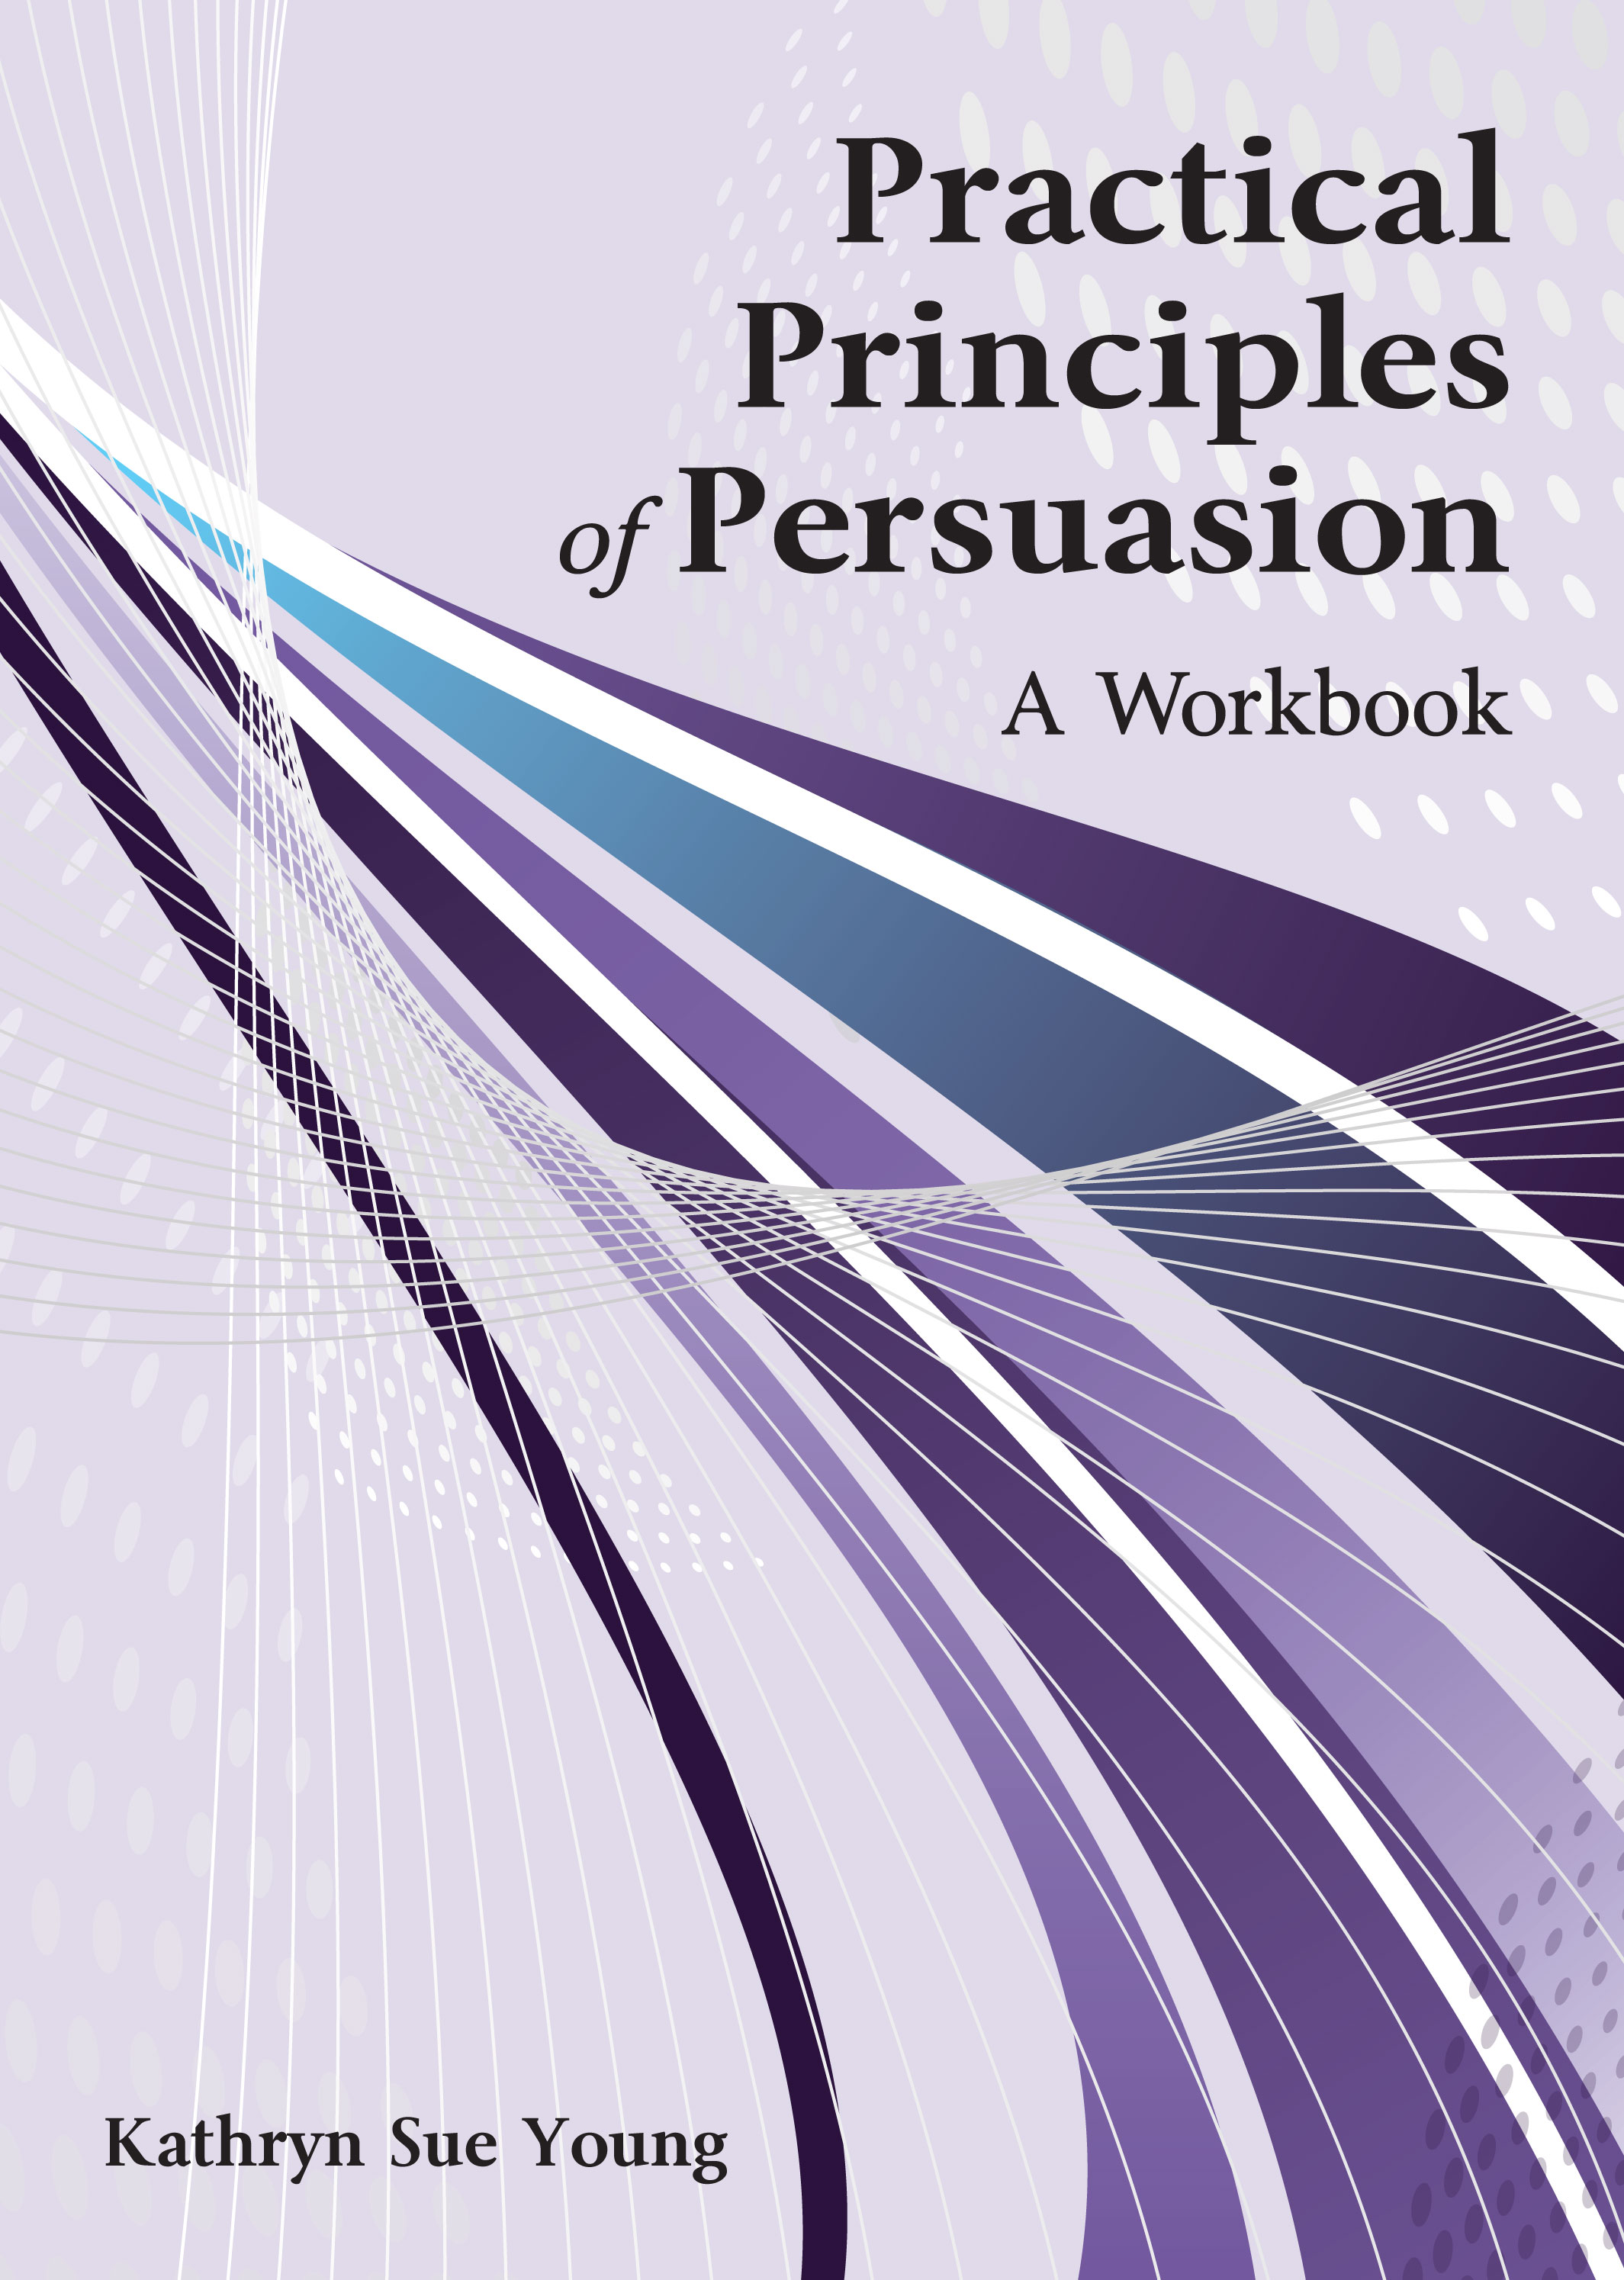 Practical Principles of Persuasion: A Workbook by Kathryn Sue Young